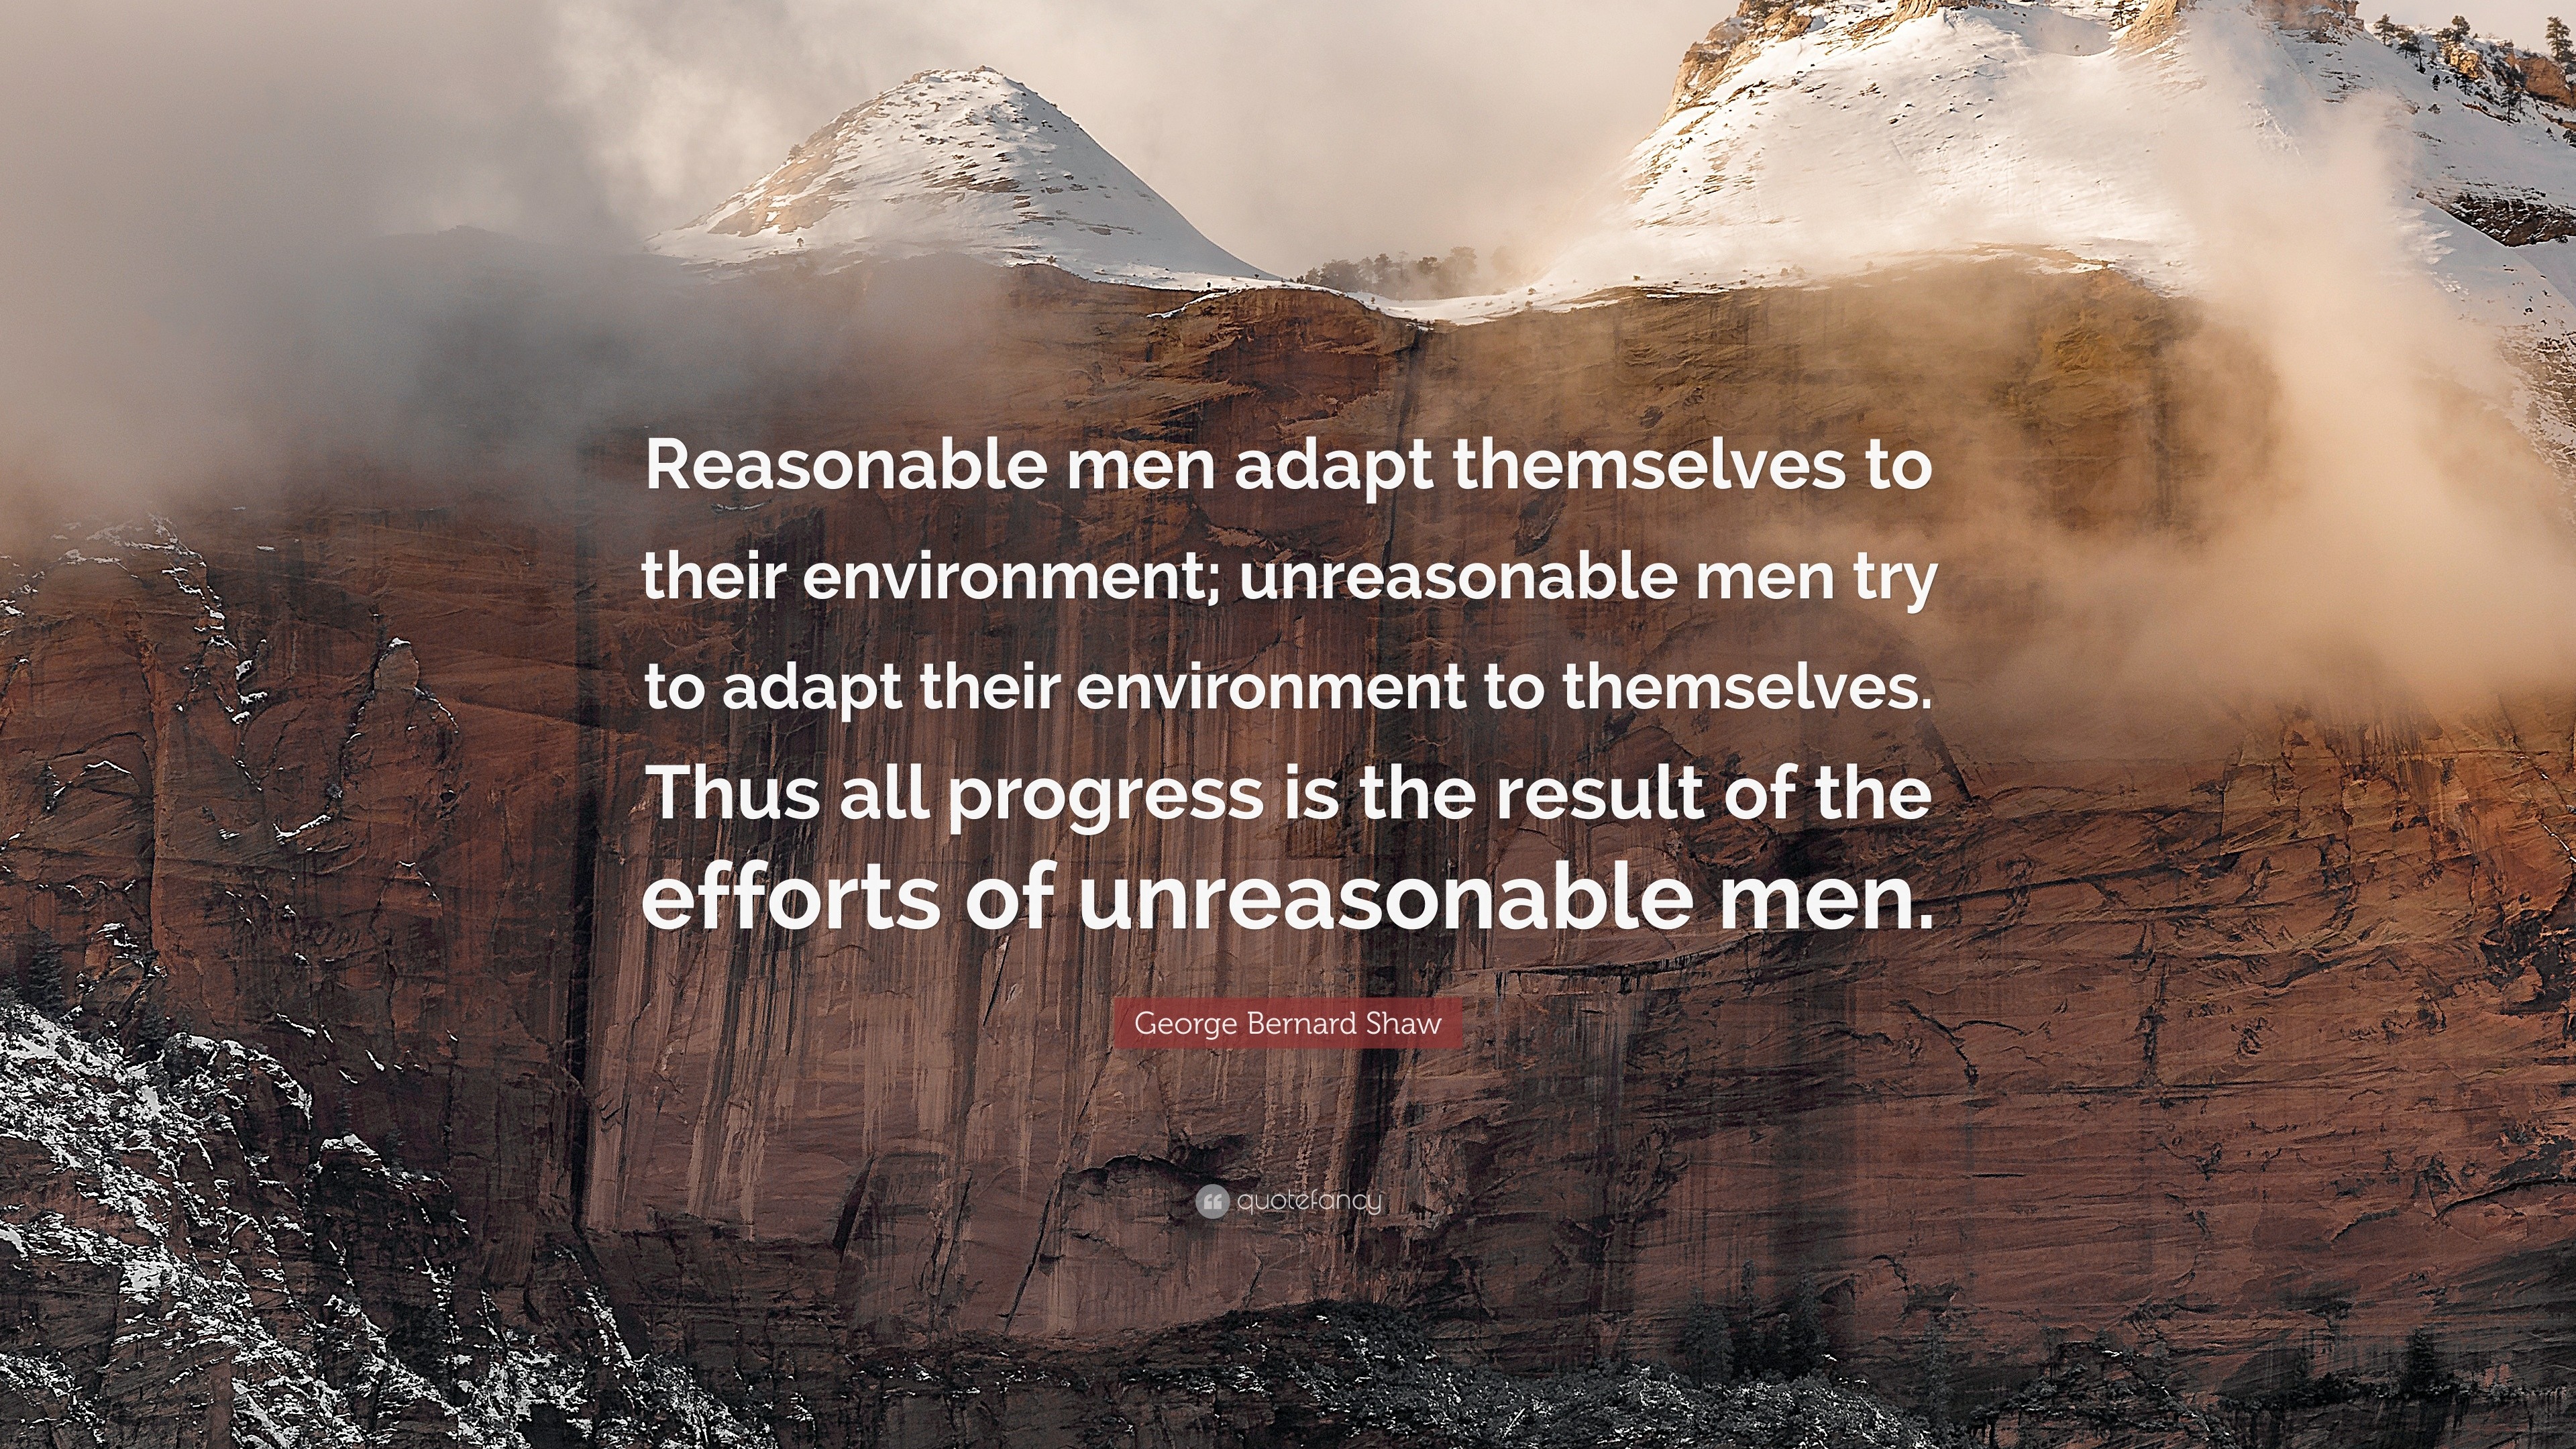 George Bernard Shaw Quote: “Reasonable Men Adapt Themselves To Their Environment; Unreasonable Men Try To Adapt Their Environment To Themselves. Thu...”